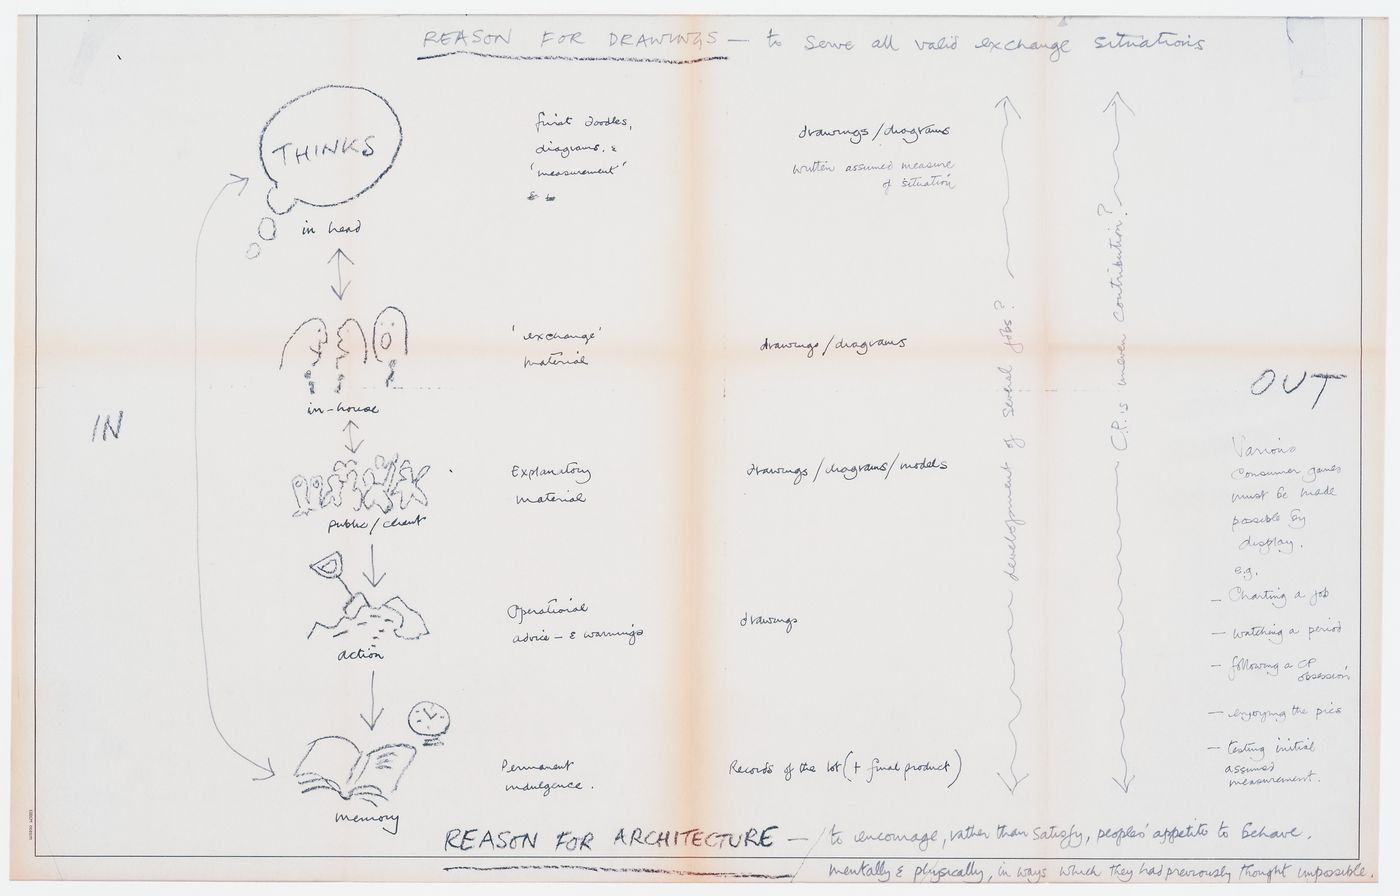 Sketches and notes on the "reason for drawings" and a statement on the "reason for architecture"